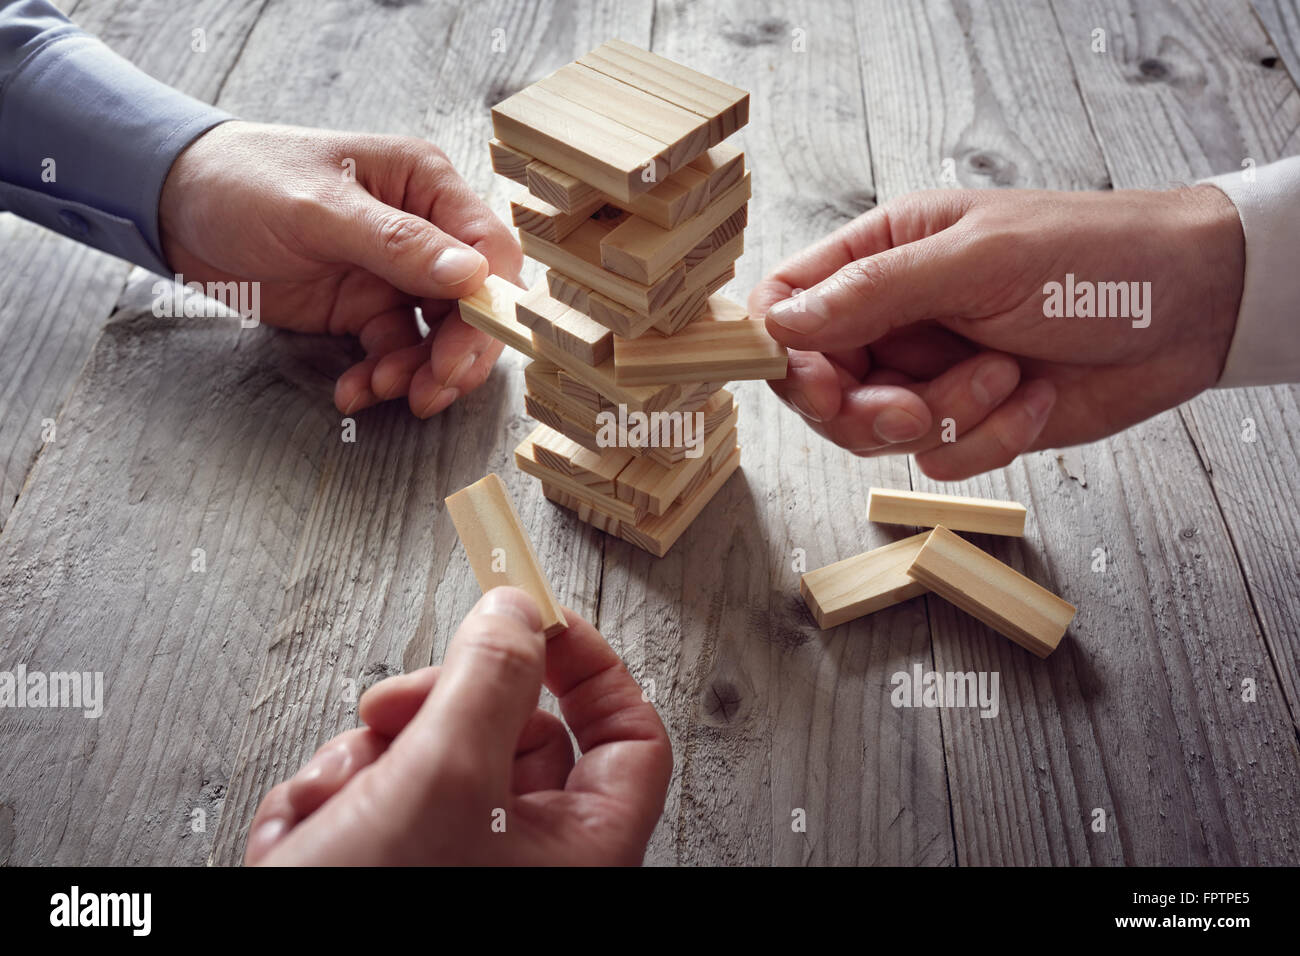 Planning, risk and team strategy in business, businessman gambling placing wooden block on a tower Stock Photo